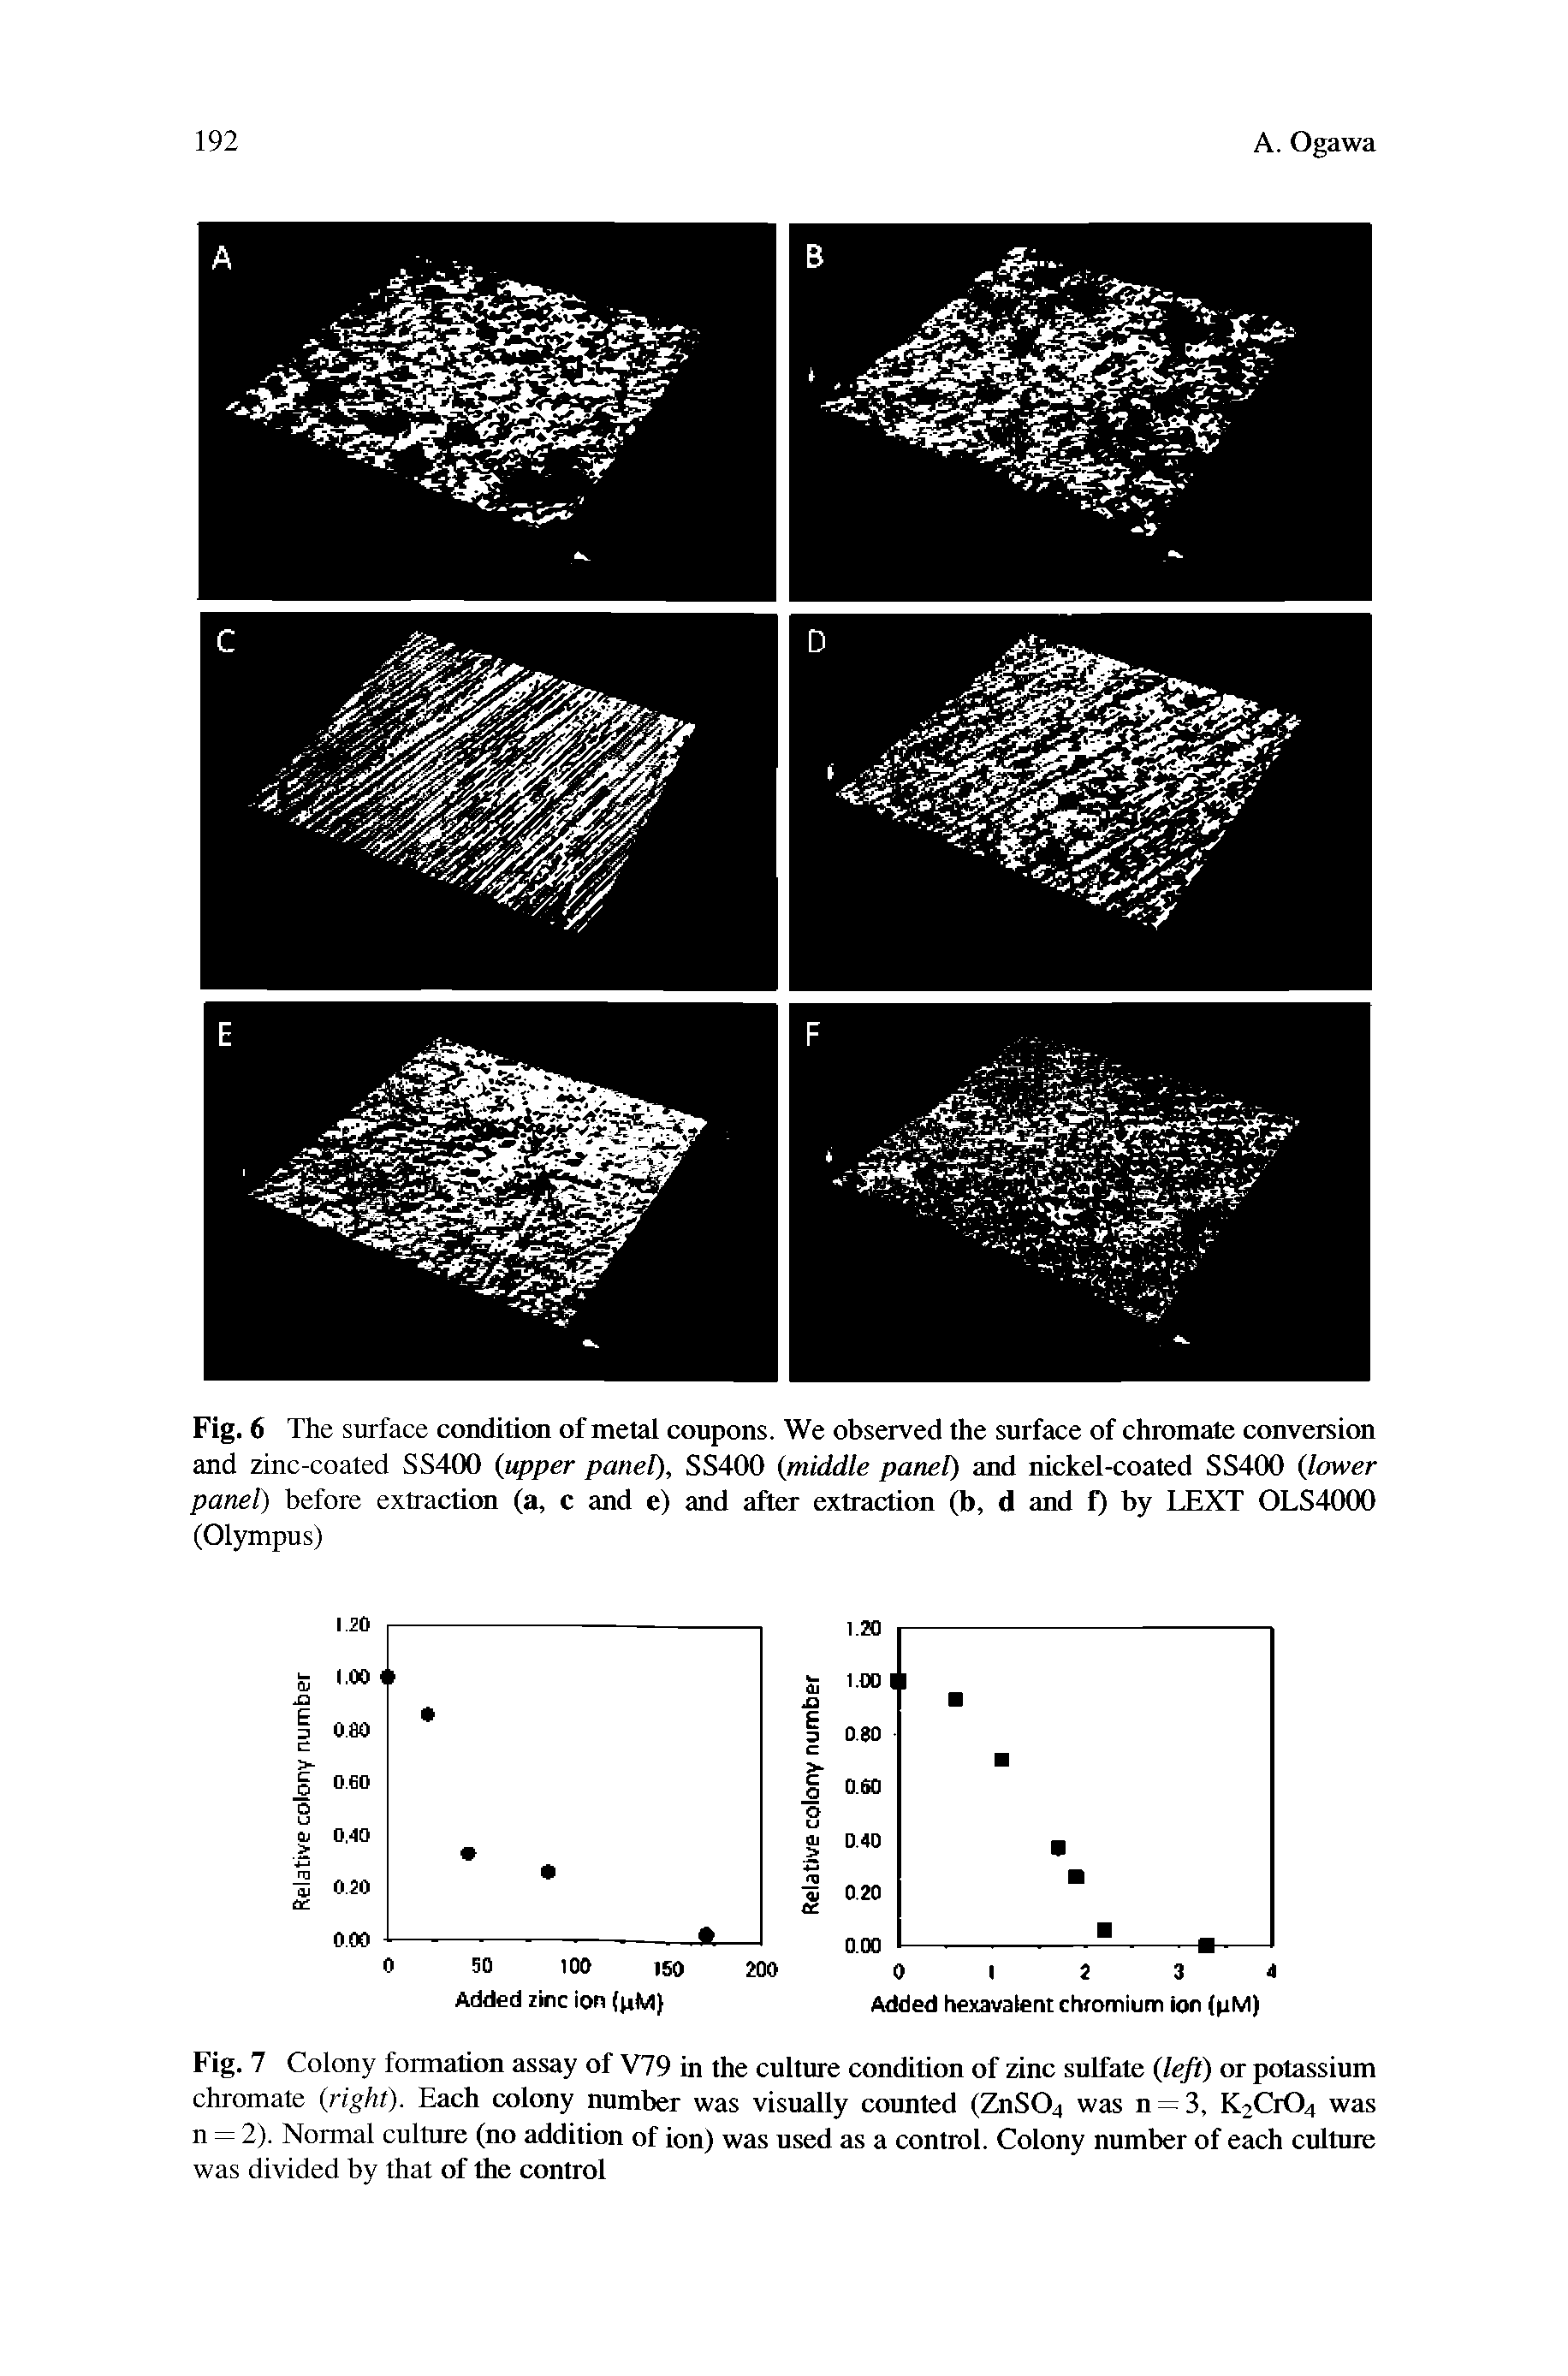 Fig. 7 Colony formation assay of V79 in the culture condition of zinc sulfate (left) or potassium chromate (right). Each colony number was visually counted (ZnS04 was n = 3, K2Cr04 was n = 2). Normal culture (no addition of ion) was used as a control. Colony number of each culture was divided by that of the control...